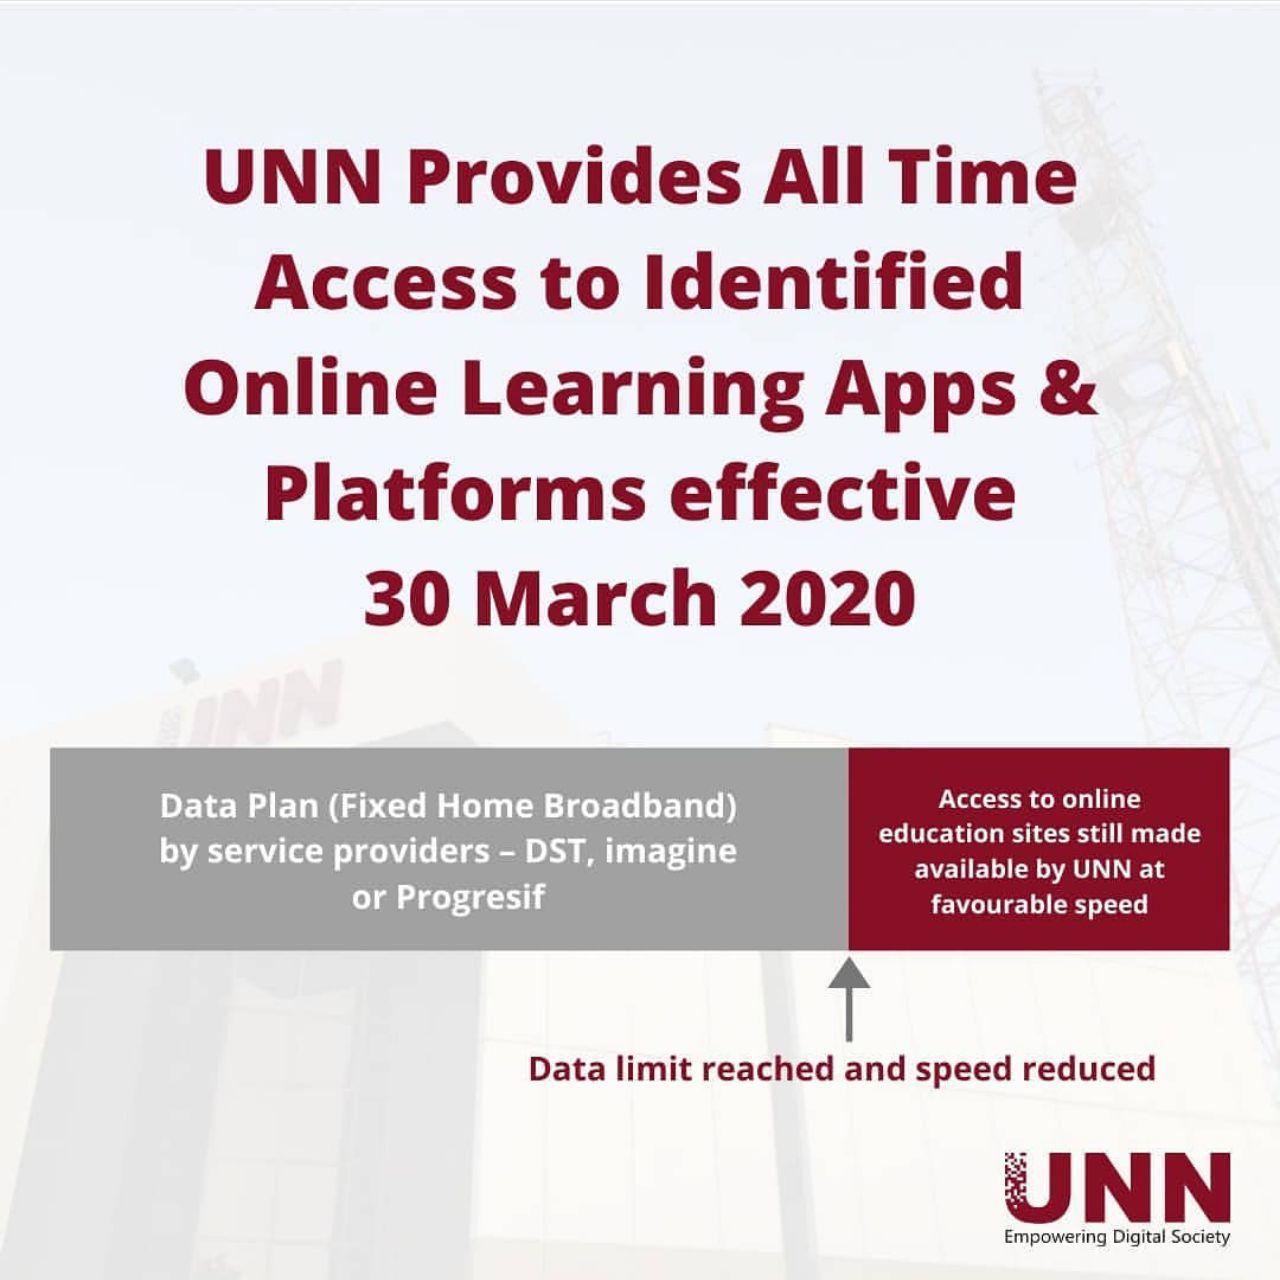 UNN Provides All Time Access to Identified Online Learning Apps & Platforms Effective 30 March 2020